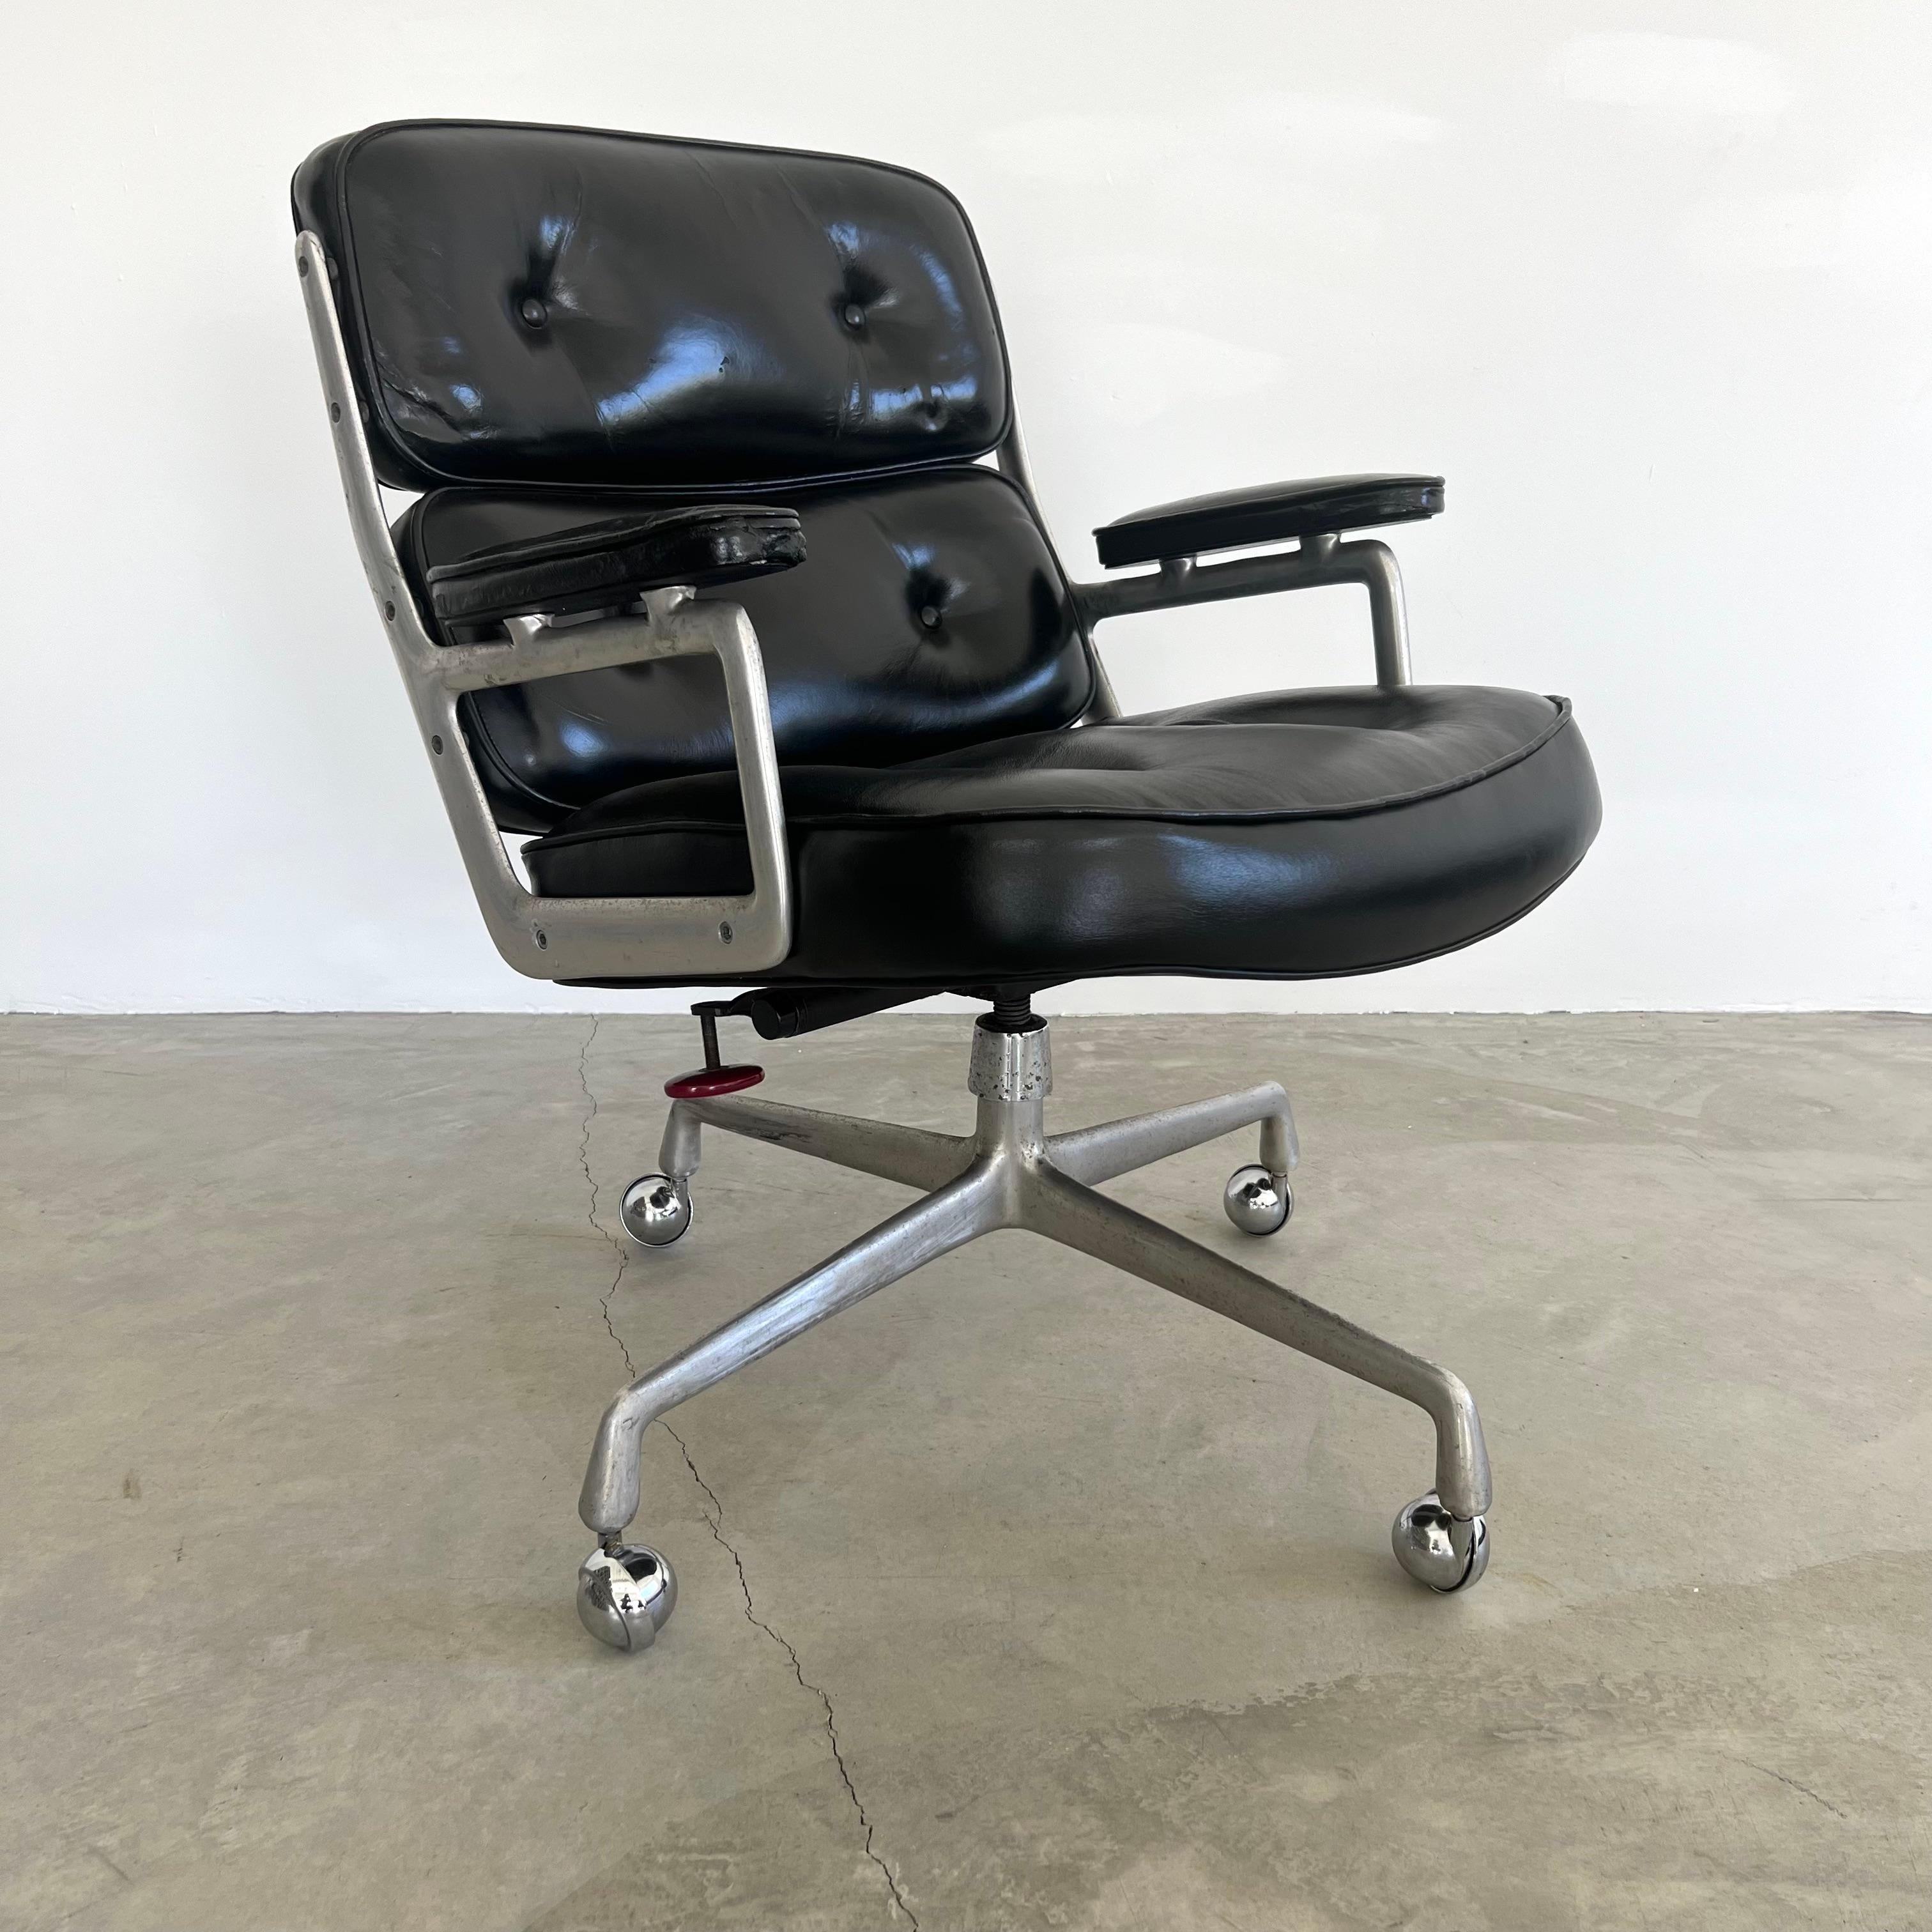 Mid-Century Modern Eames Time Life Chair in Black Leather for Herman Miller, 1980s USA For Sale